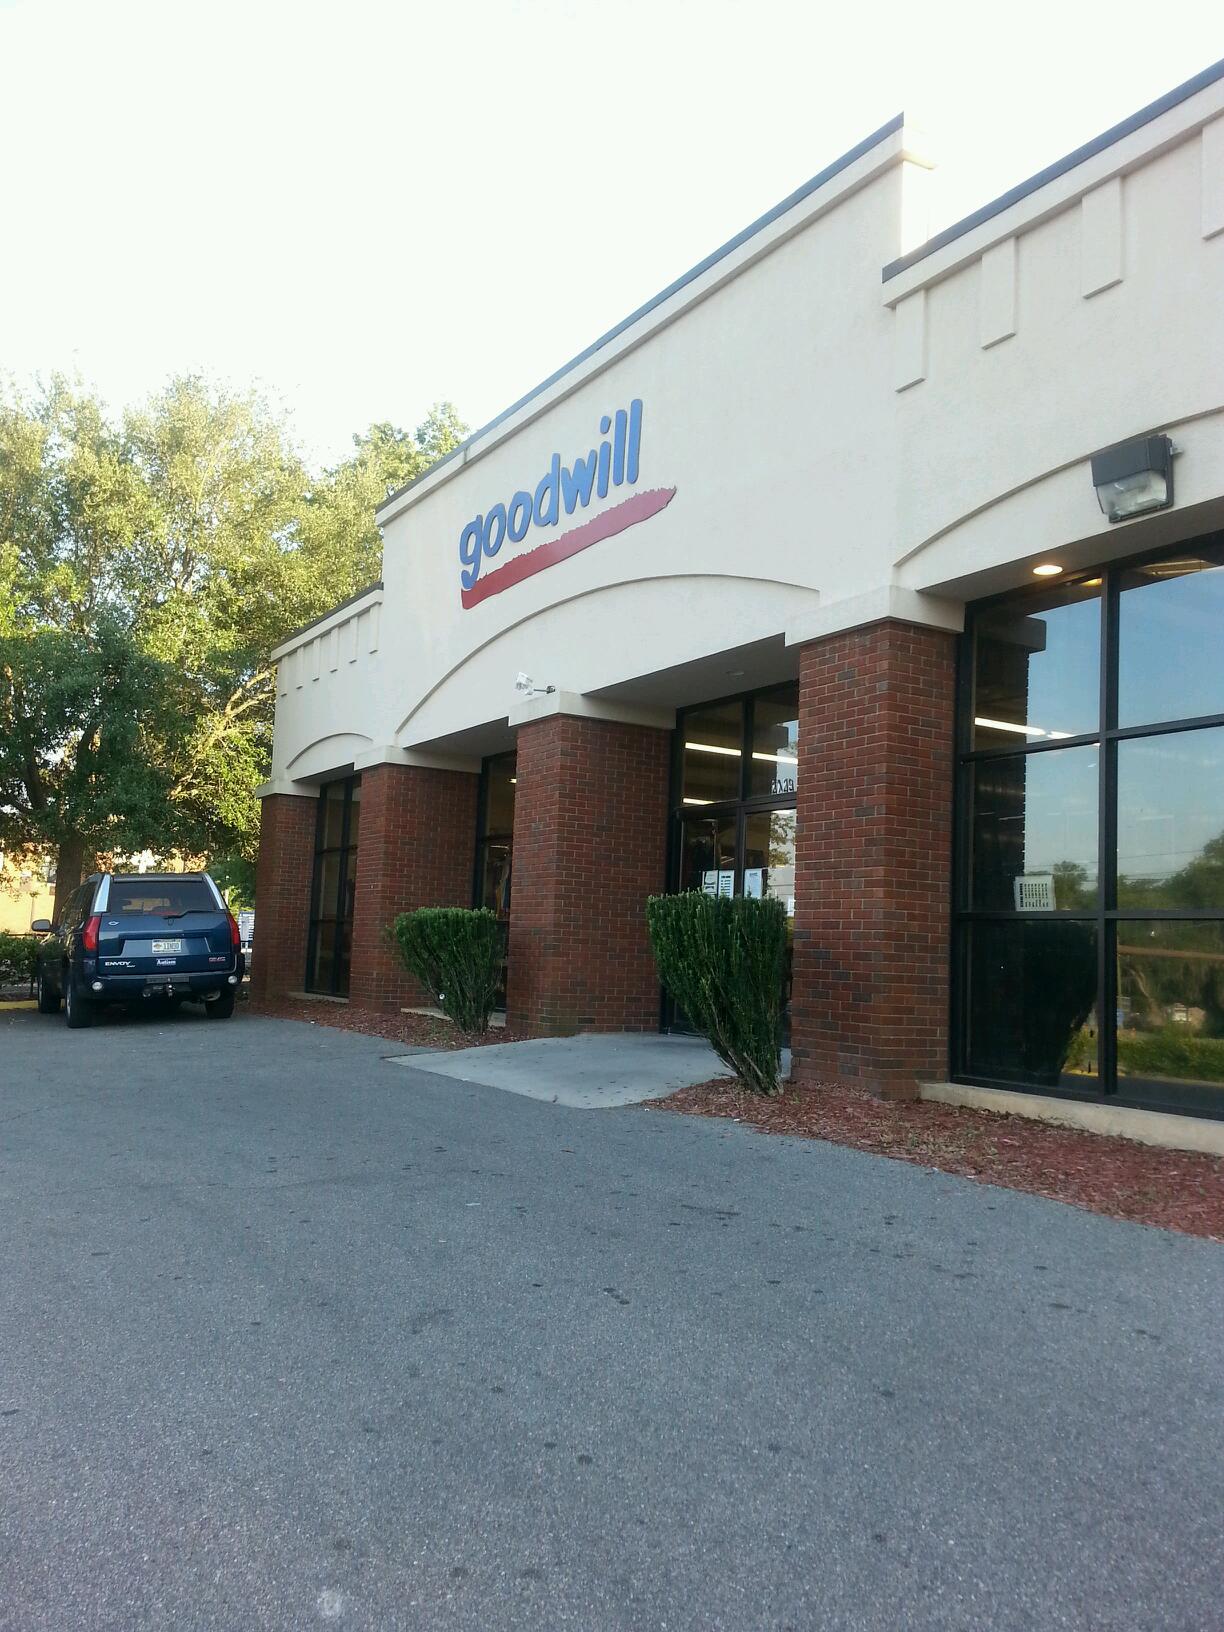 Goodwill Retail Store and Donation